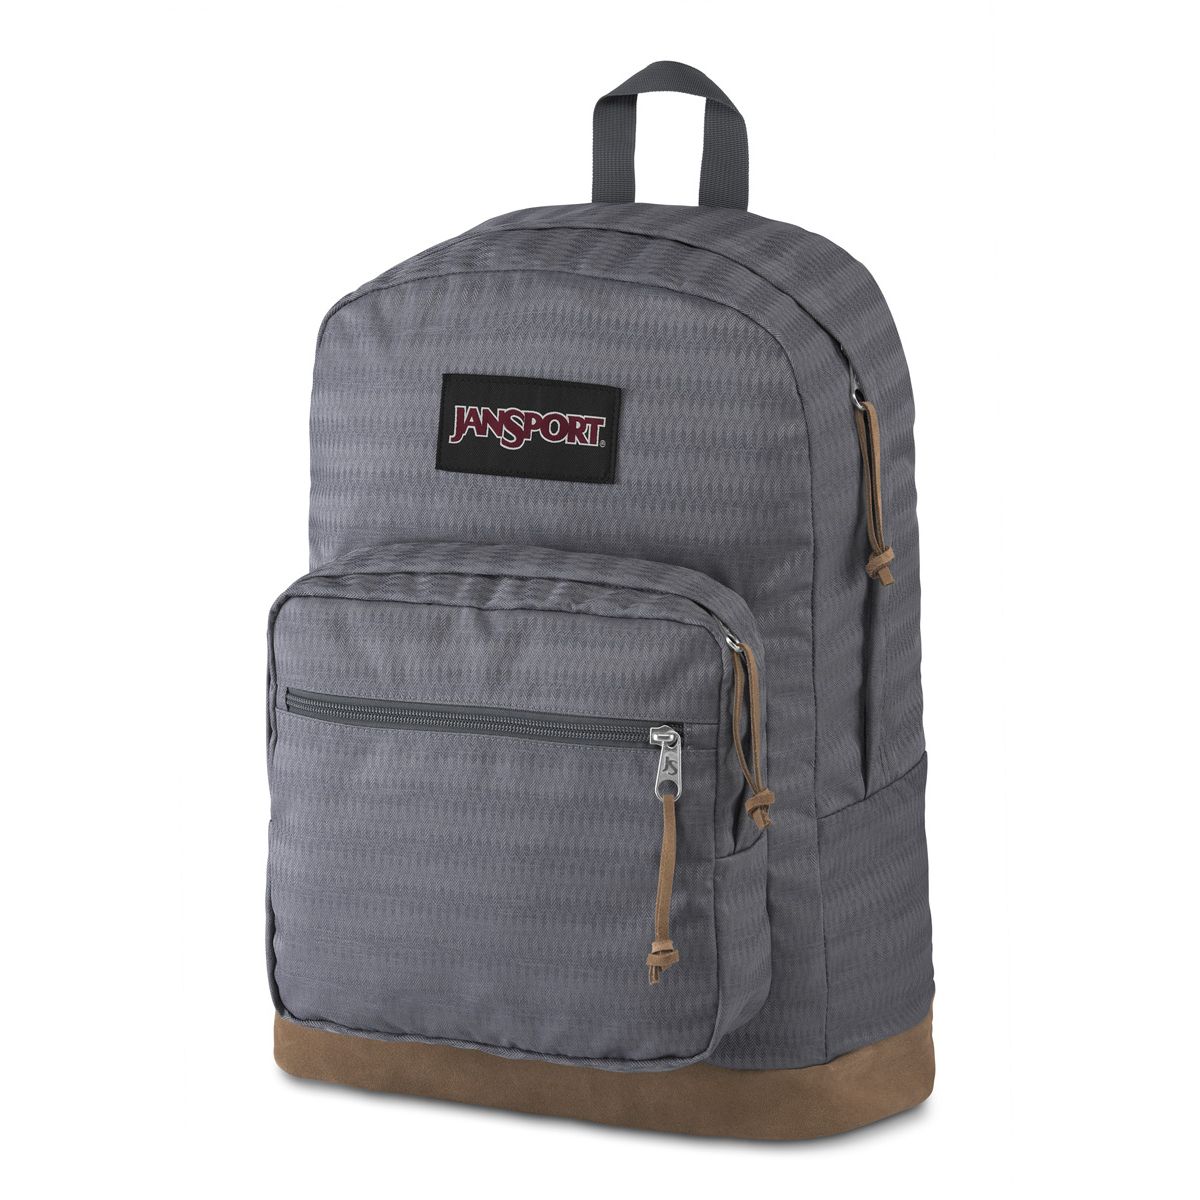 JanSport Right Pack Expressions Backpack in Deep Grey Ombre Herringbone ...